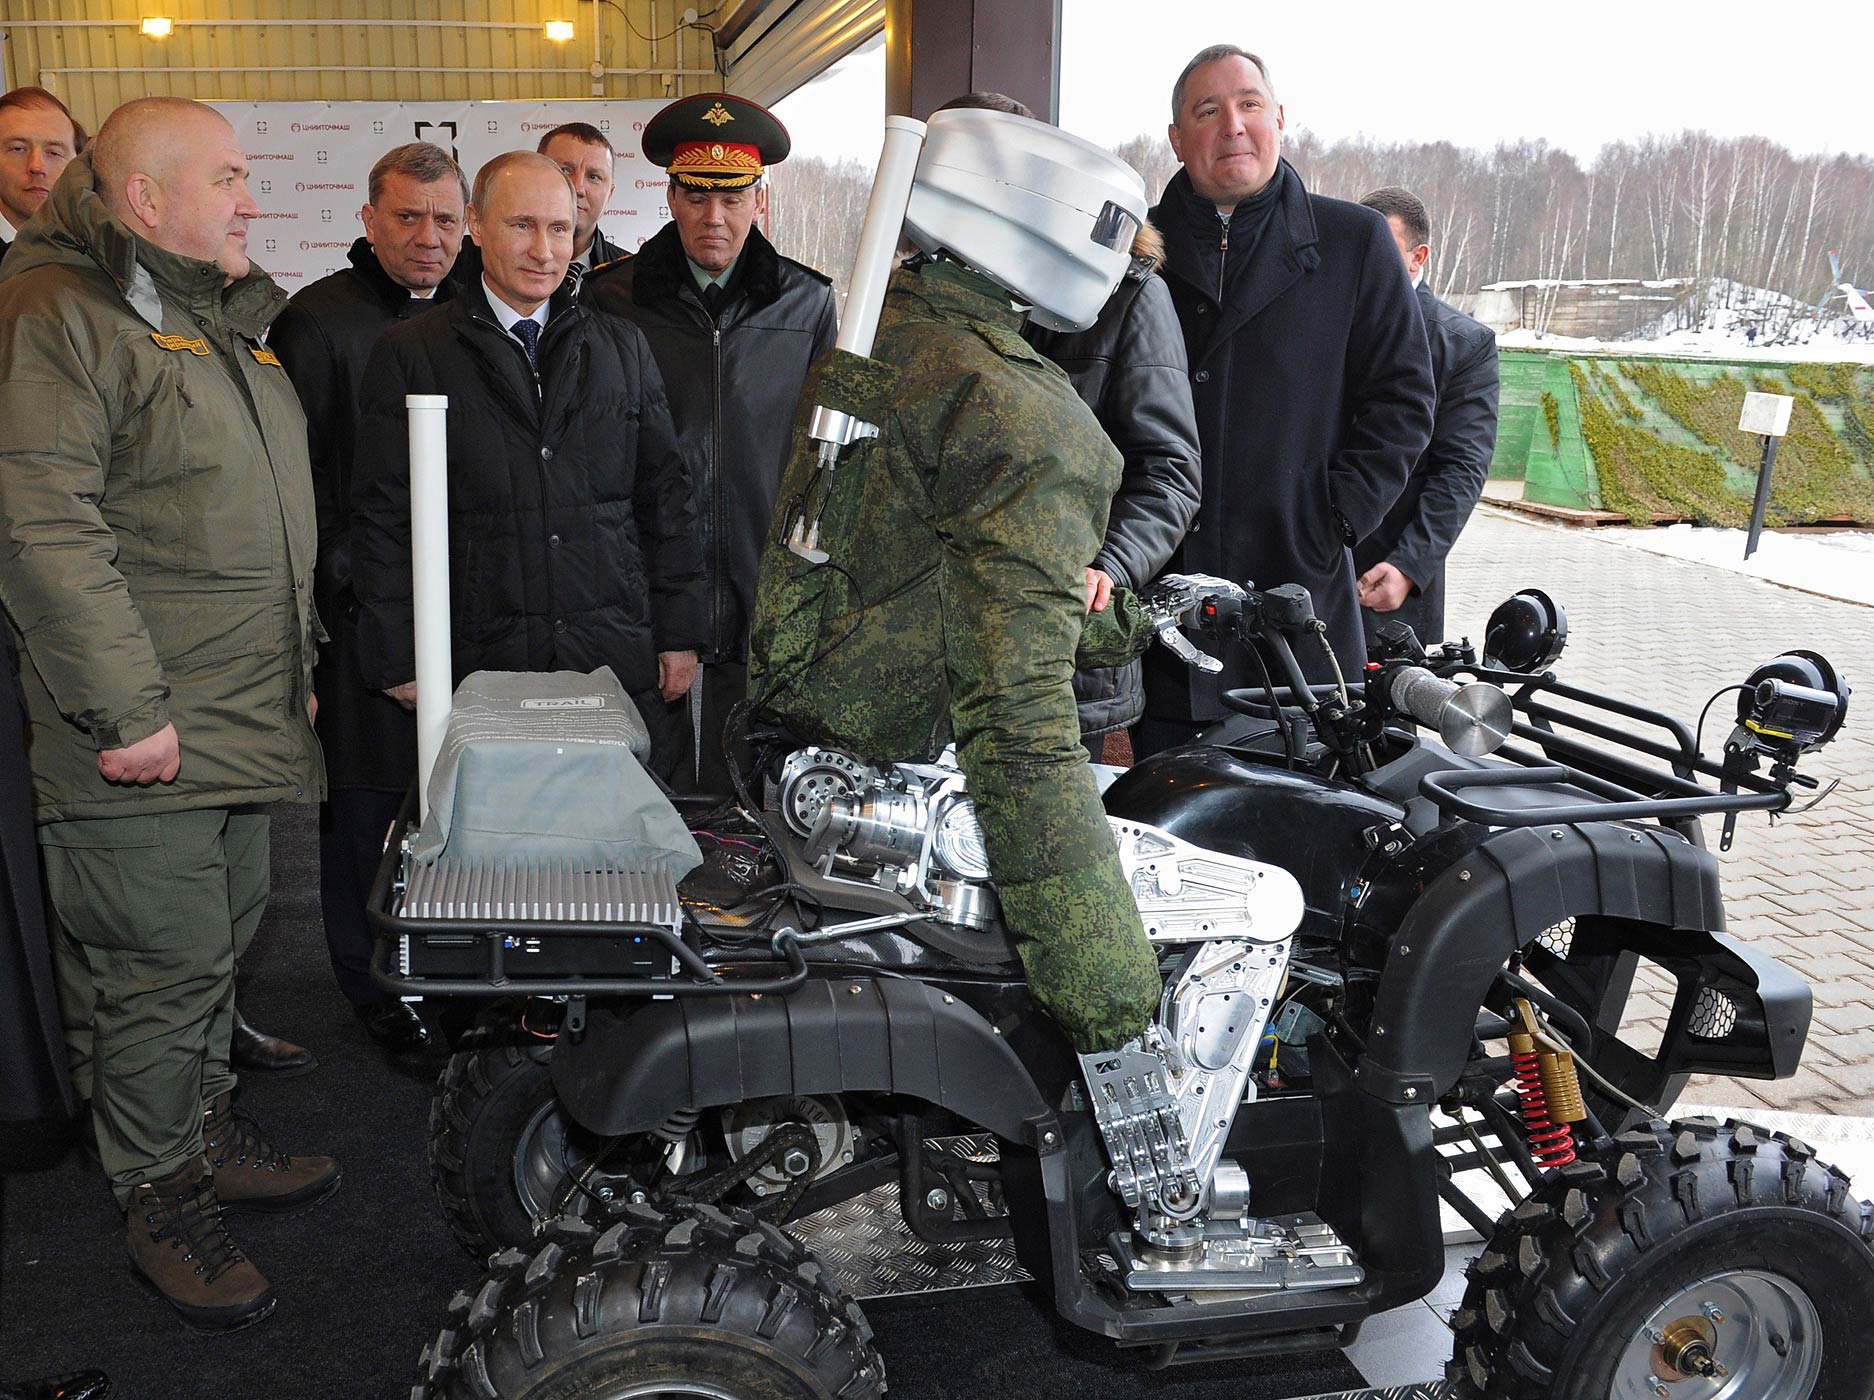 Russian President Vladimir Putin examines a Russian made android robot during his visits to the Central Scientific Research Institute of Precise Mechanical Engineering in Klimovsk, Russia on Jan. 20, 2015. (Mikhail Klimentyev—RIA-NOVOSTI/AFP/Getty Images)